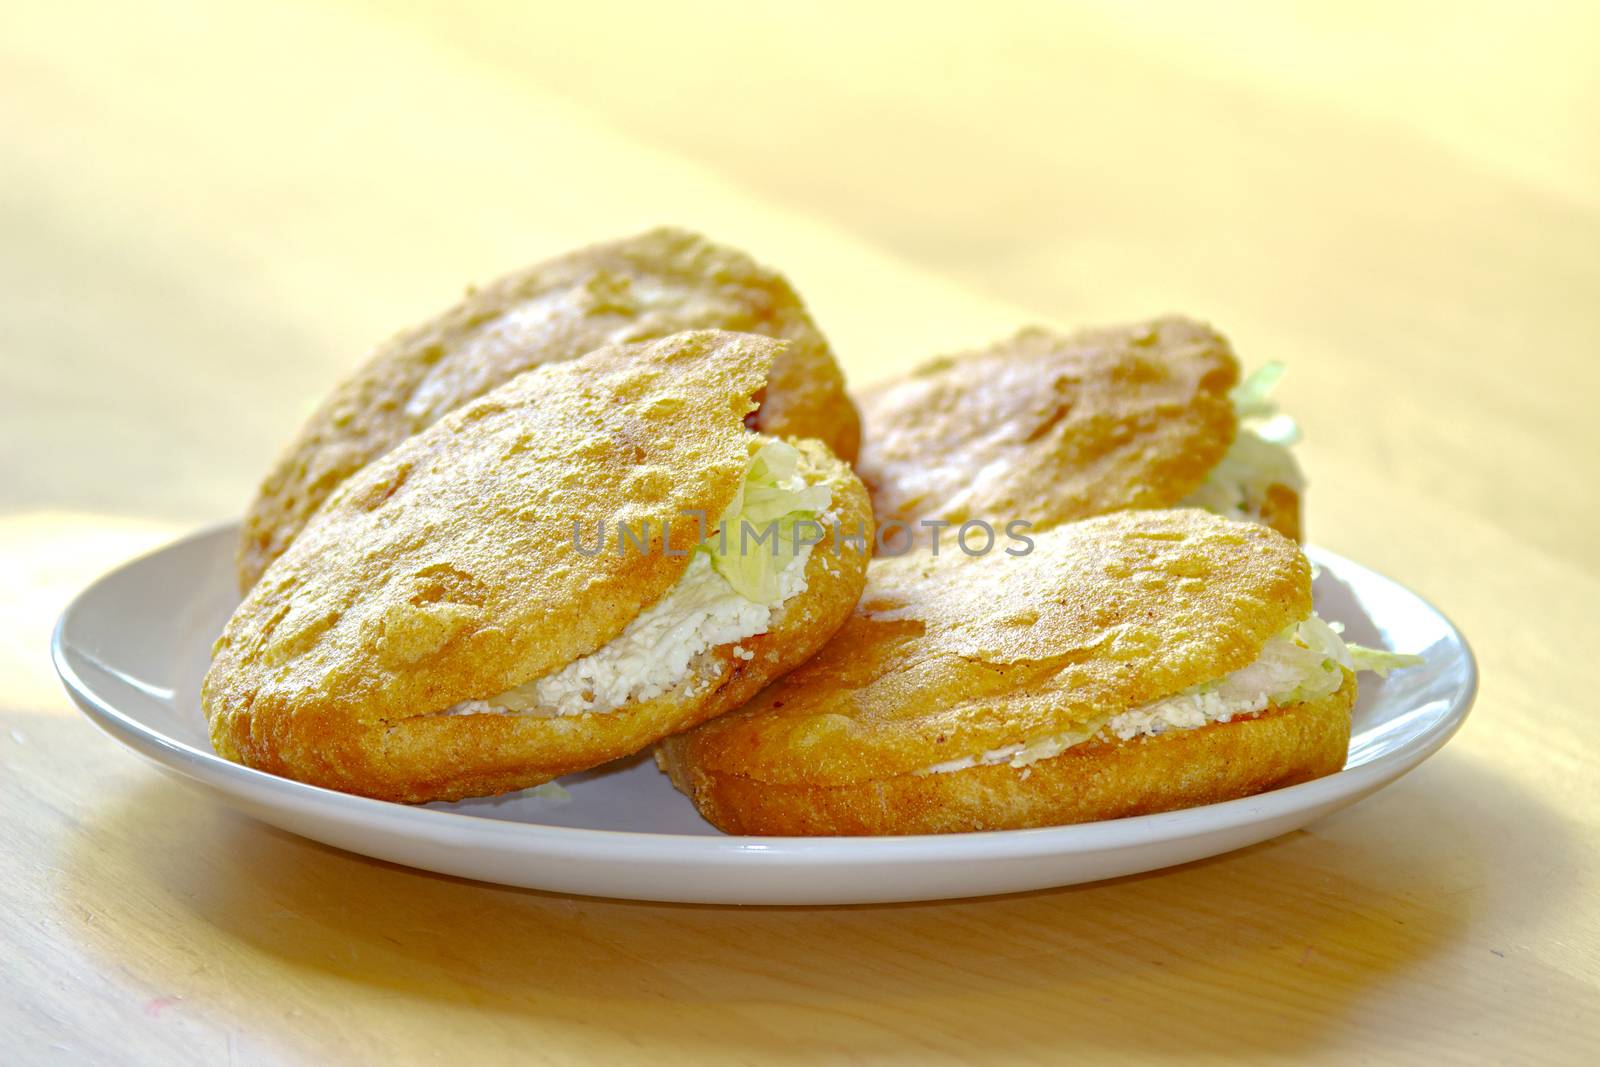 A Gordita "chubby" in Spanish is a Mexican cuisine is a pastry made with maize dough and stuffed with cheese, meat, or other fillings. by oasisamuel